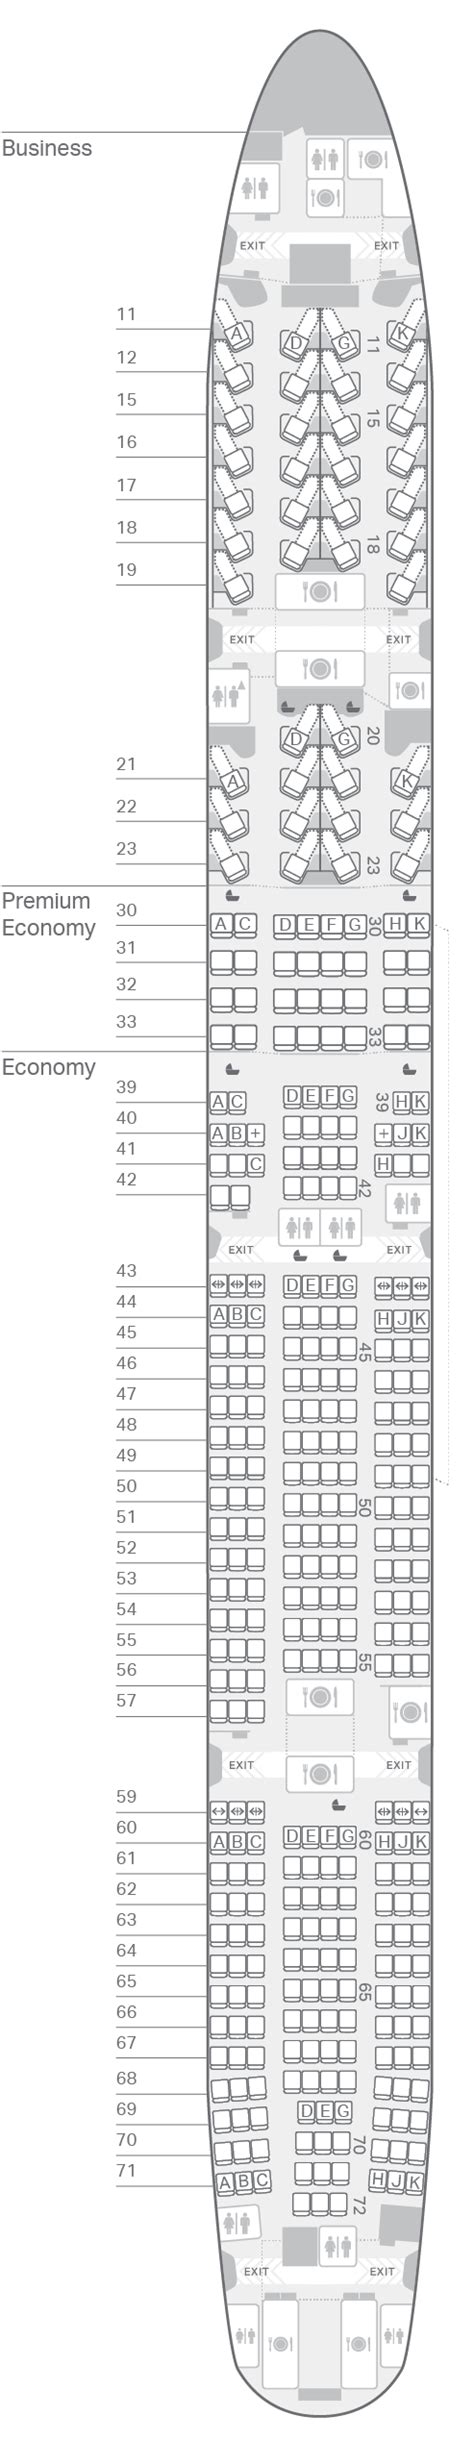 Delta Boeing 777 300er Seating Chart Porn Sex Picture